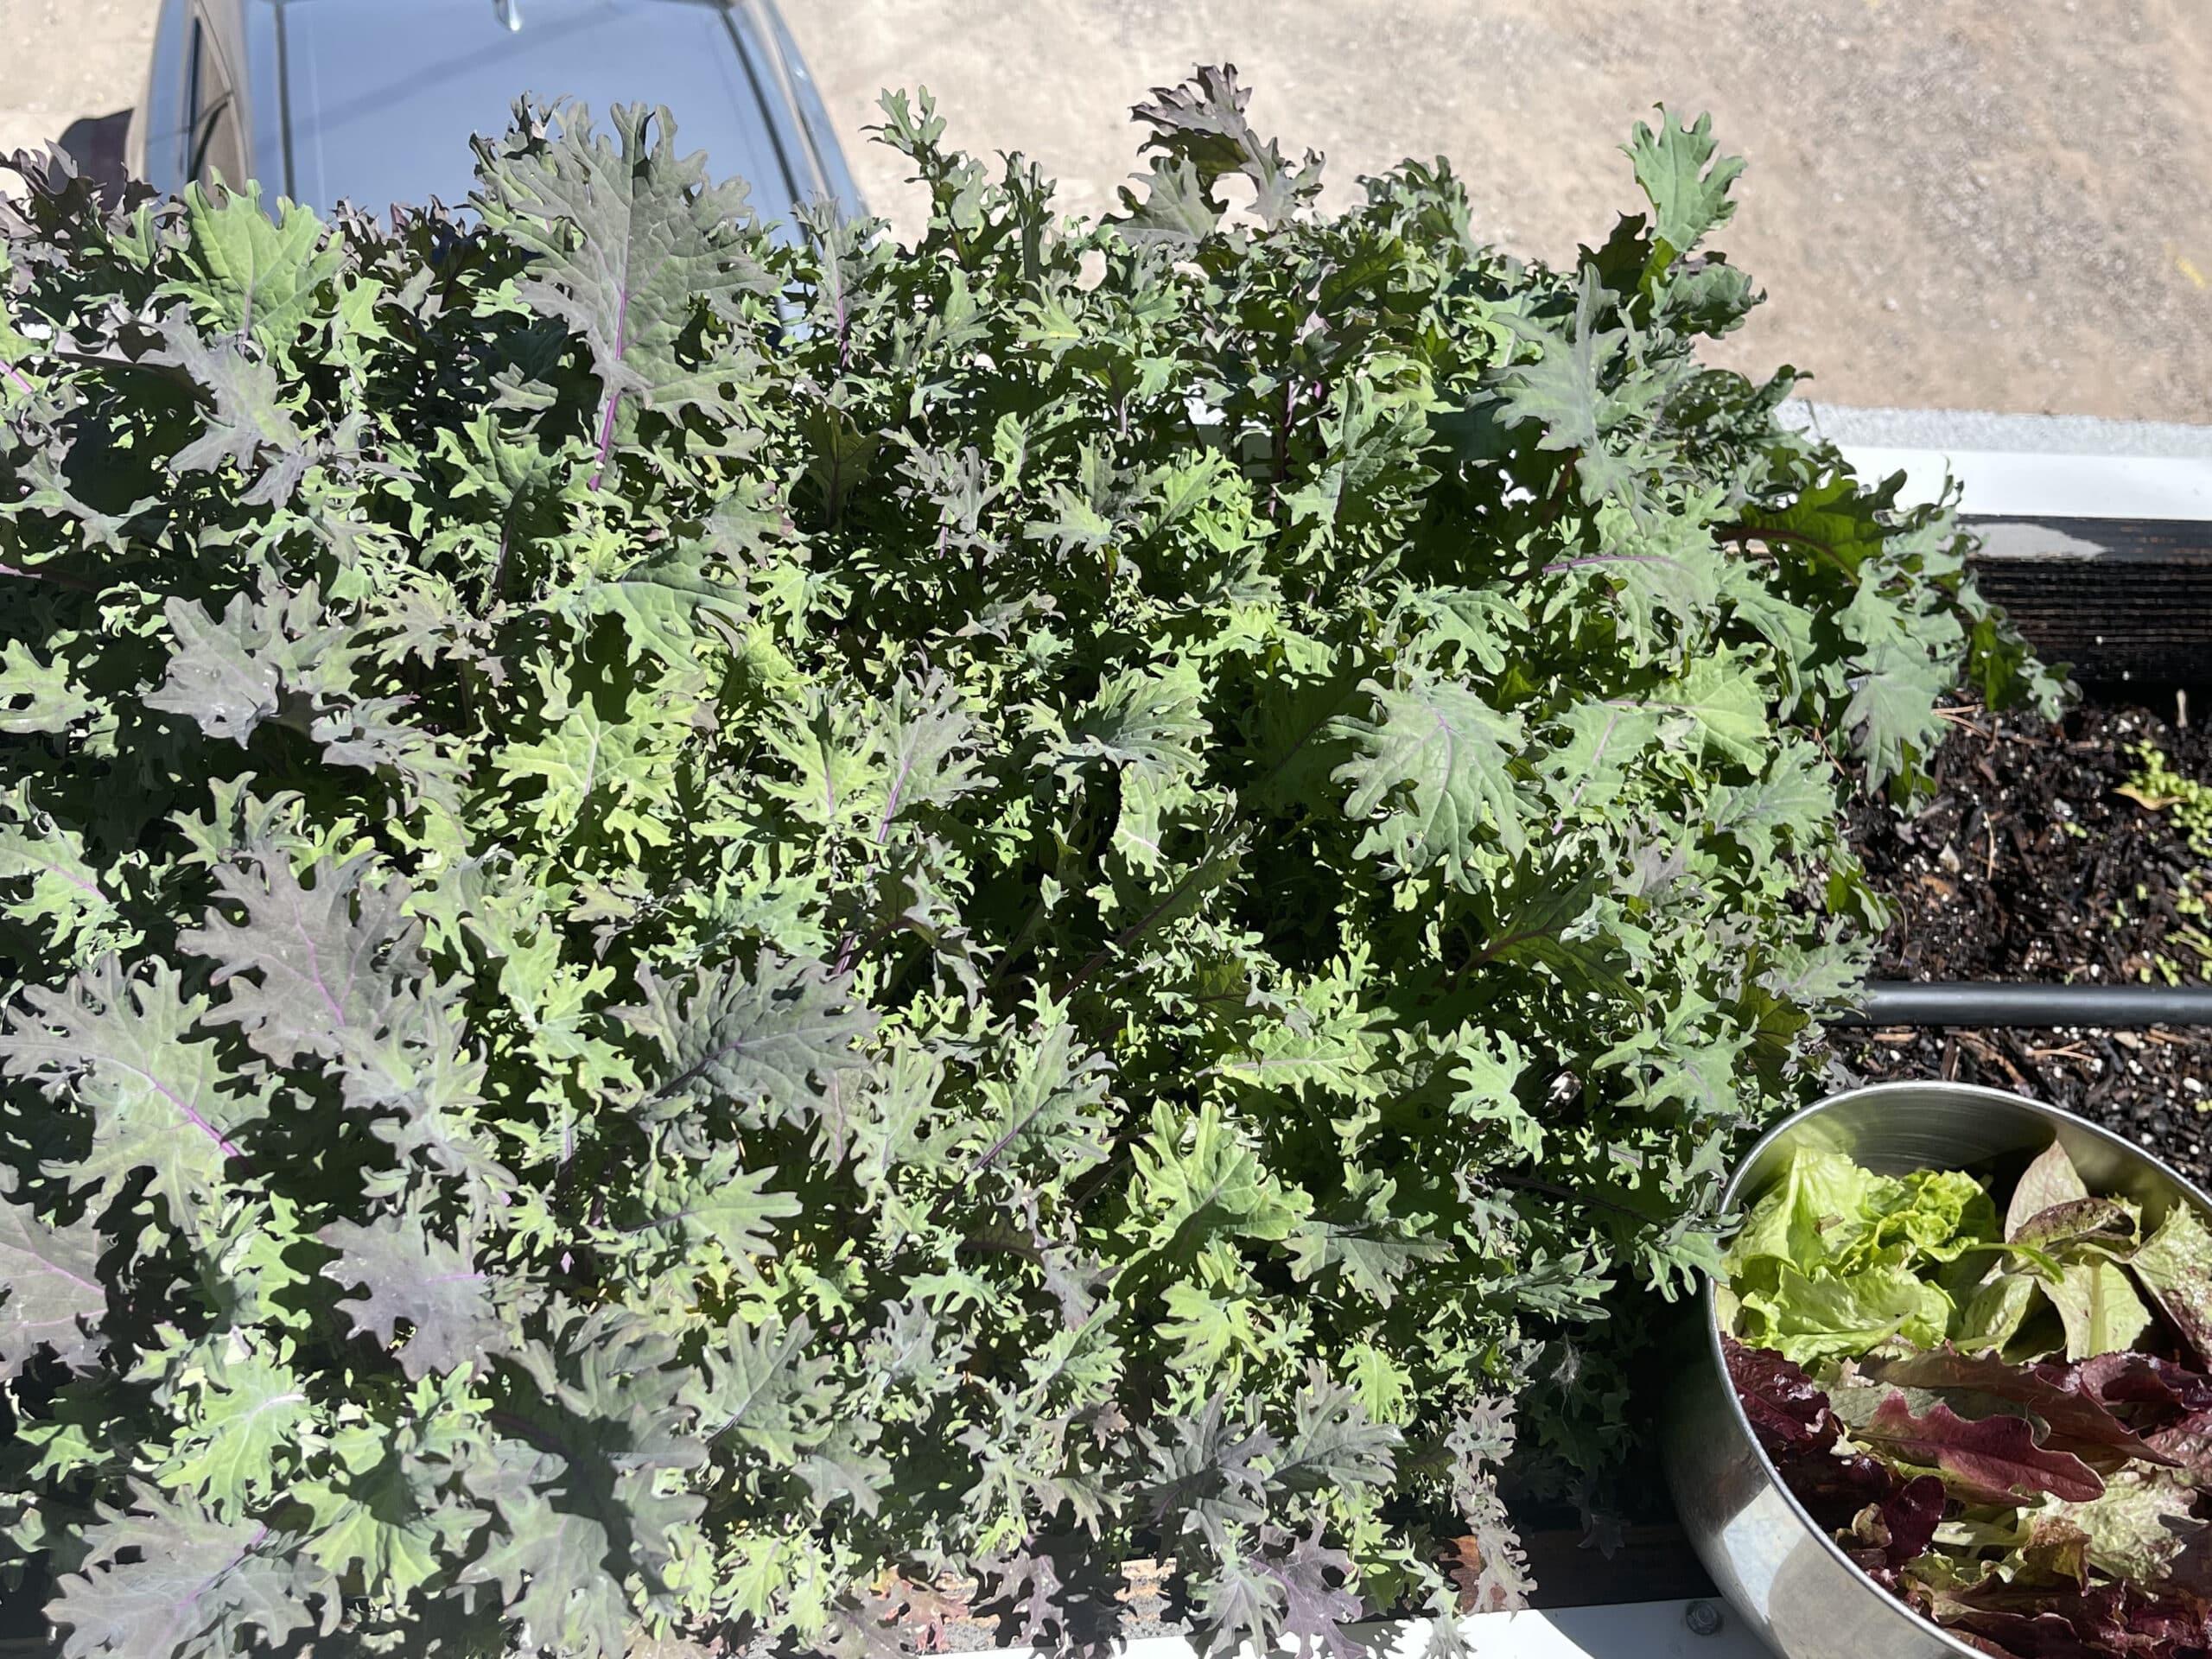 Russian kale and dindin